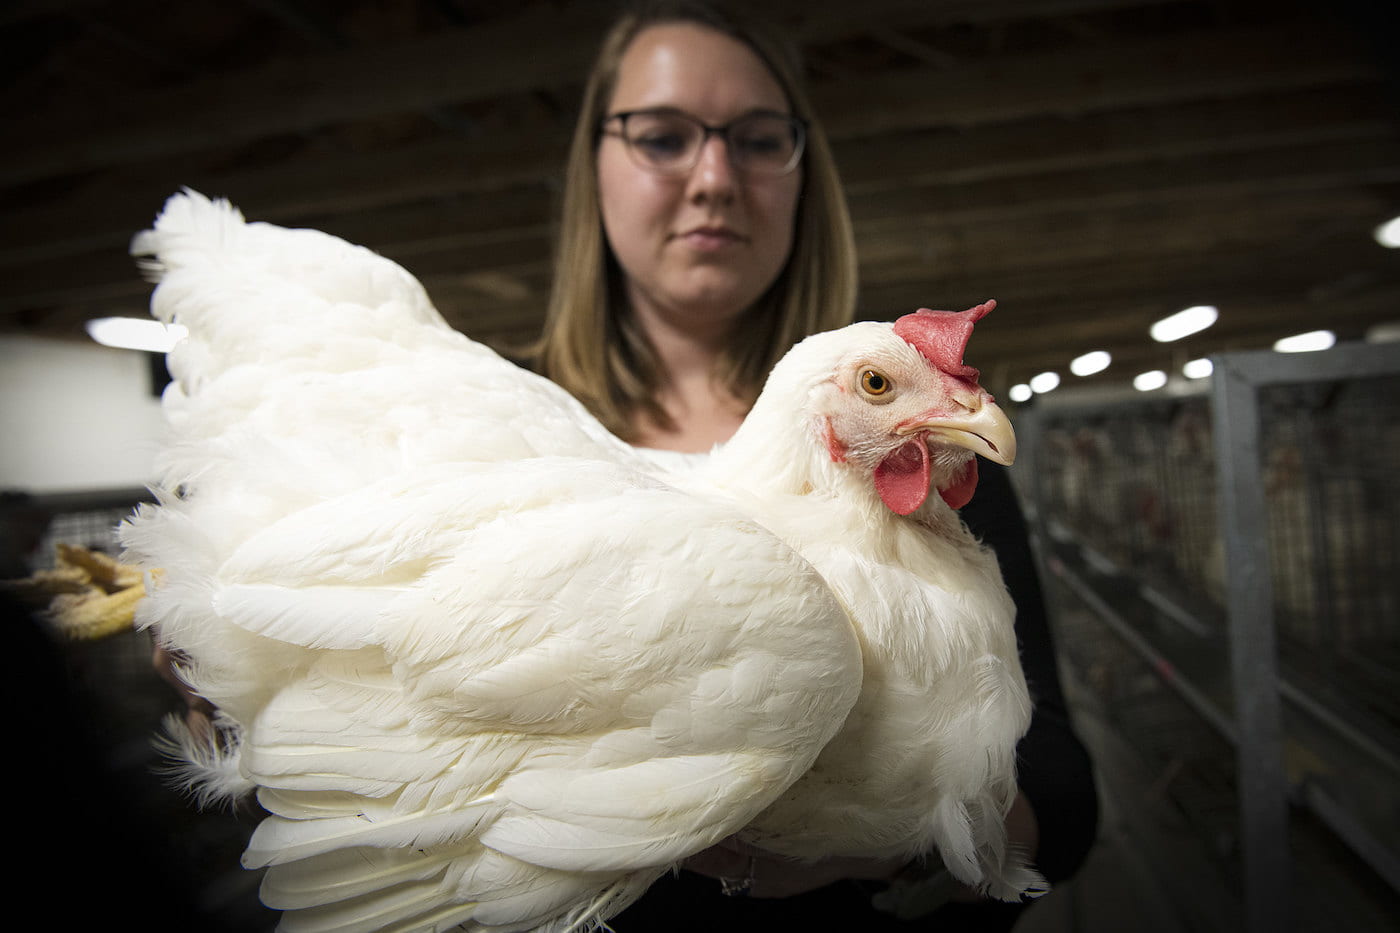 NOT THIRSTY — Sara Orlowski, assistant professor of poultry science, is selecting broilers for water efficiency. Her aim is to breed for birds that maintain consistent feed conversion and weight gain while consuming less water. (U of A System Division of Agriculture photo by Fred Miller)